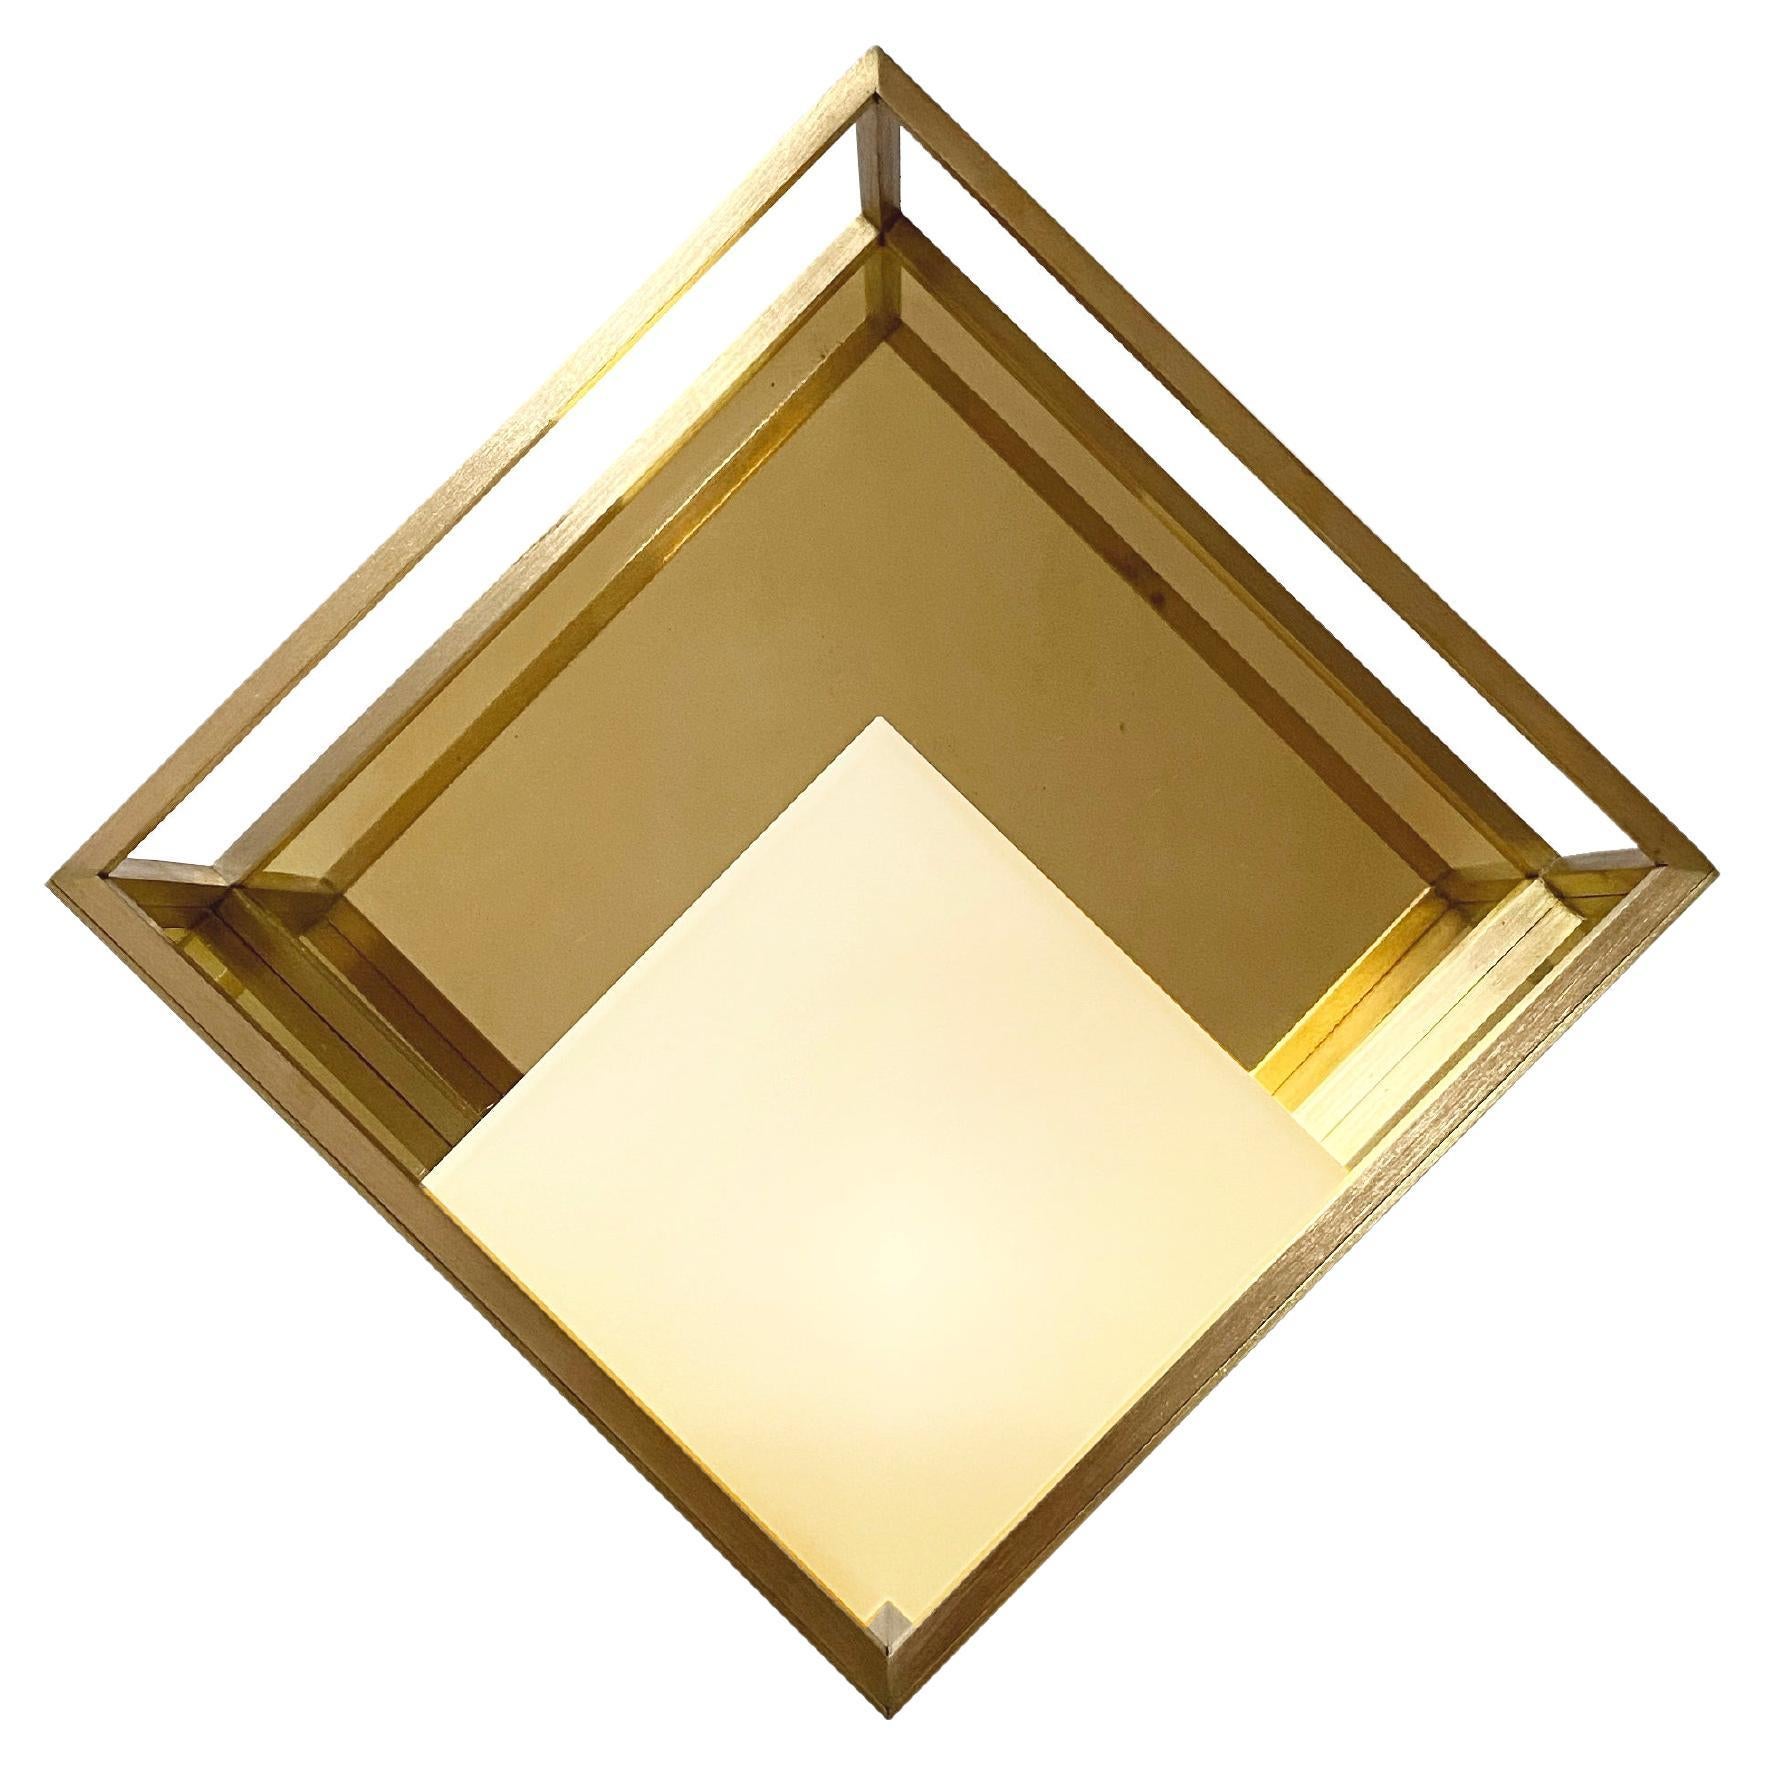 Wiso Sconce / Wall Lighting Brass by Diaphan Studio, REP by Tuleste Factory